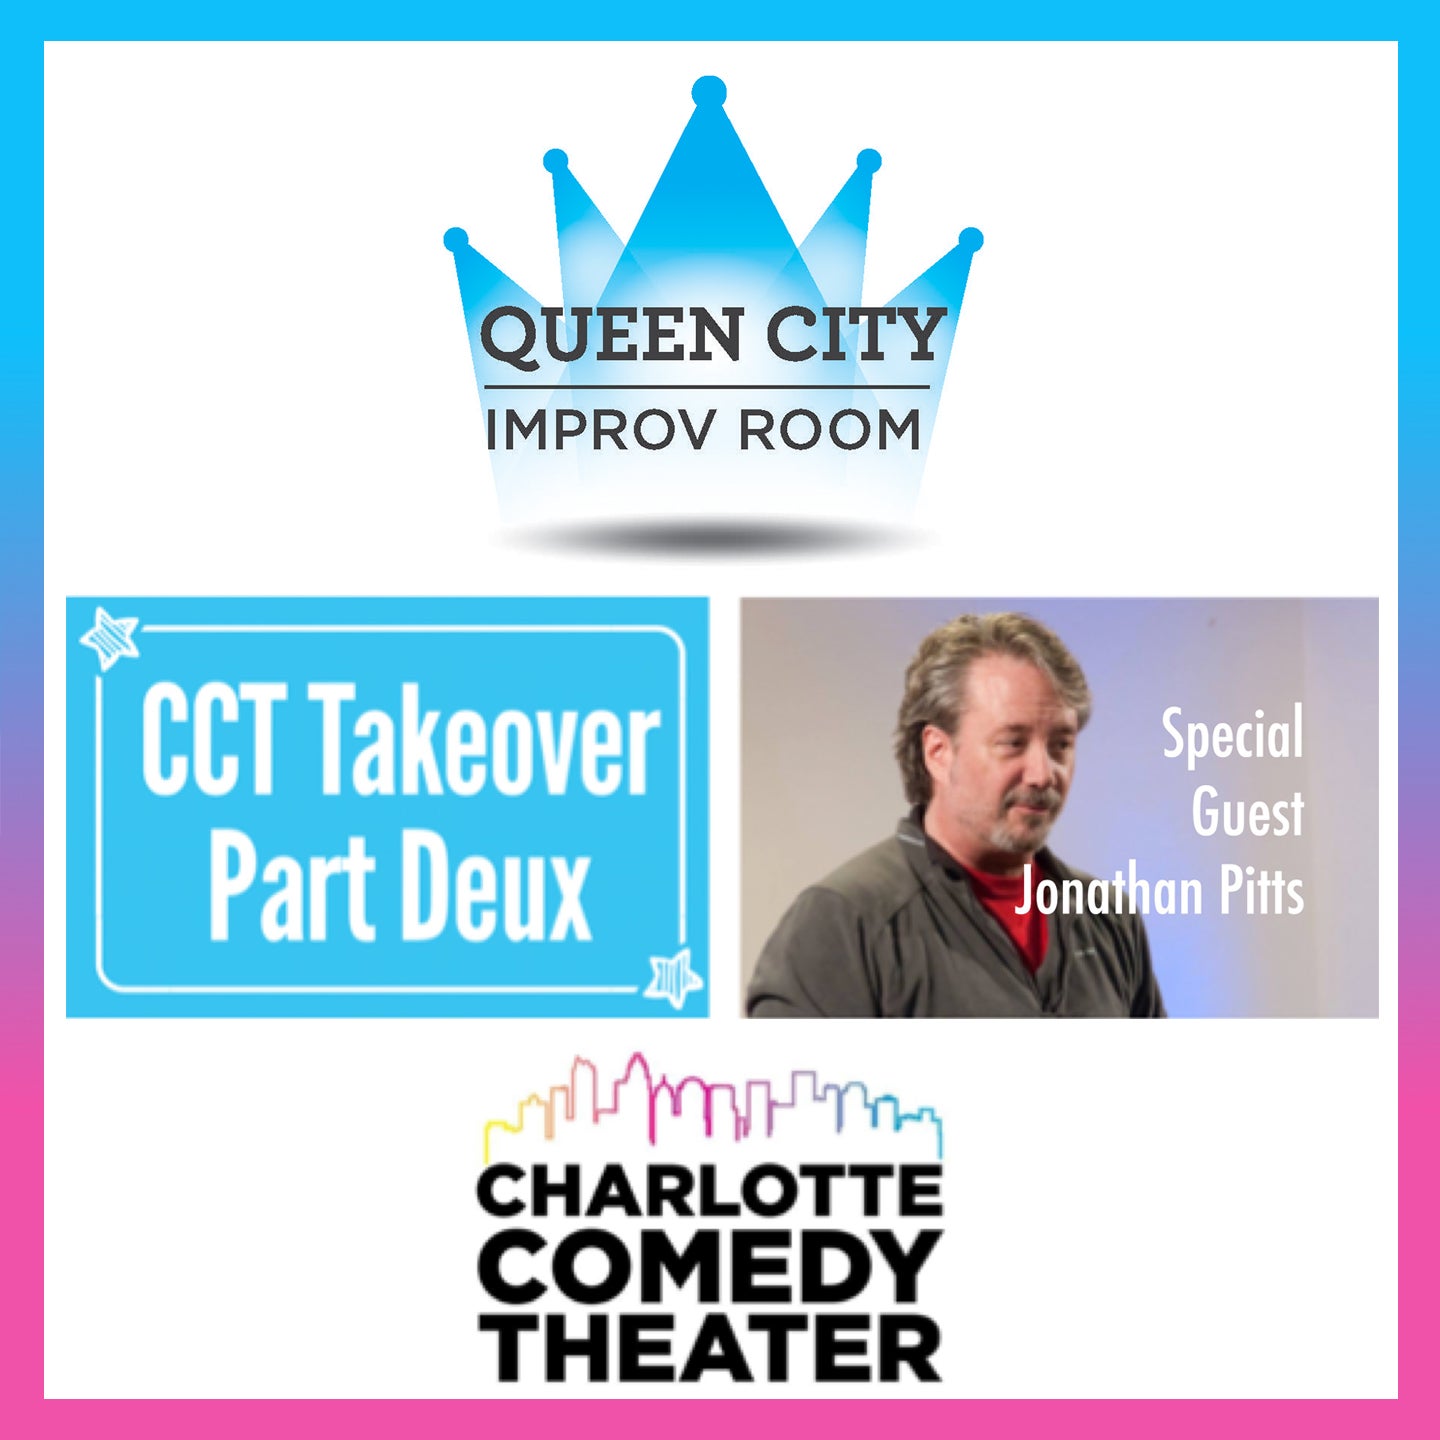 Queen City Improv Room: CCT Takeover with Jonathan Pitts